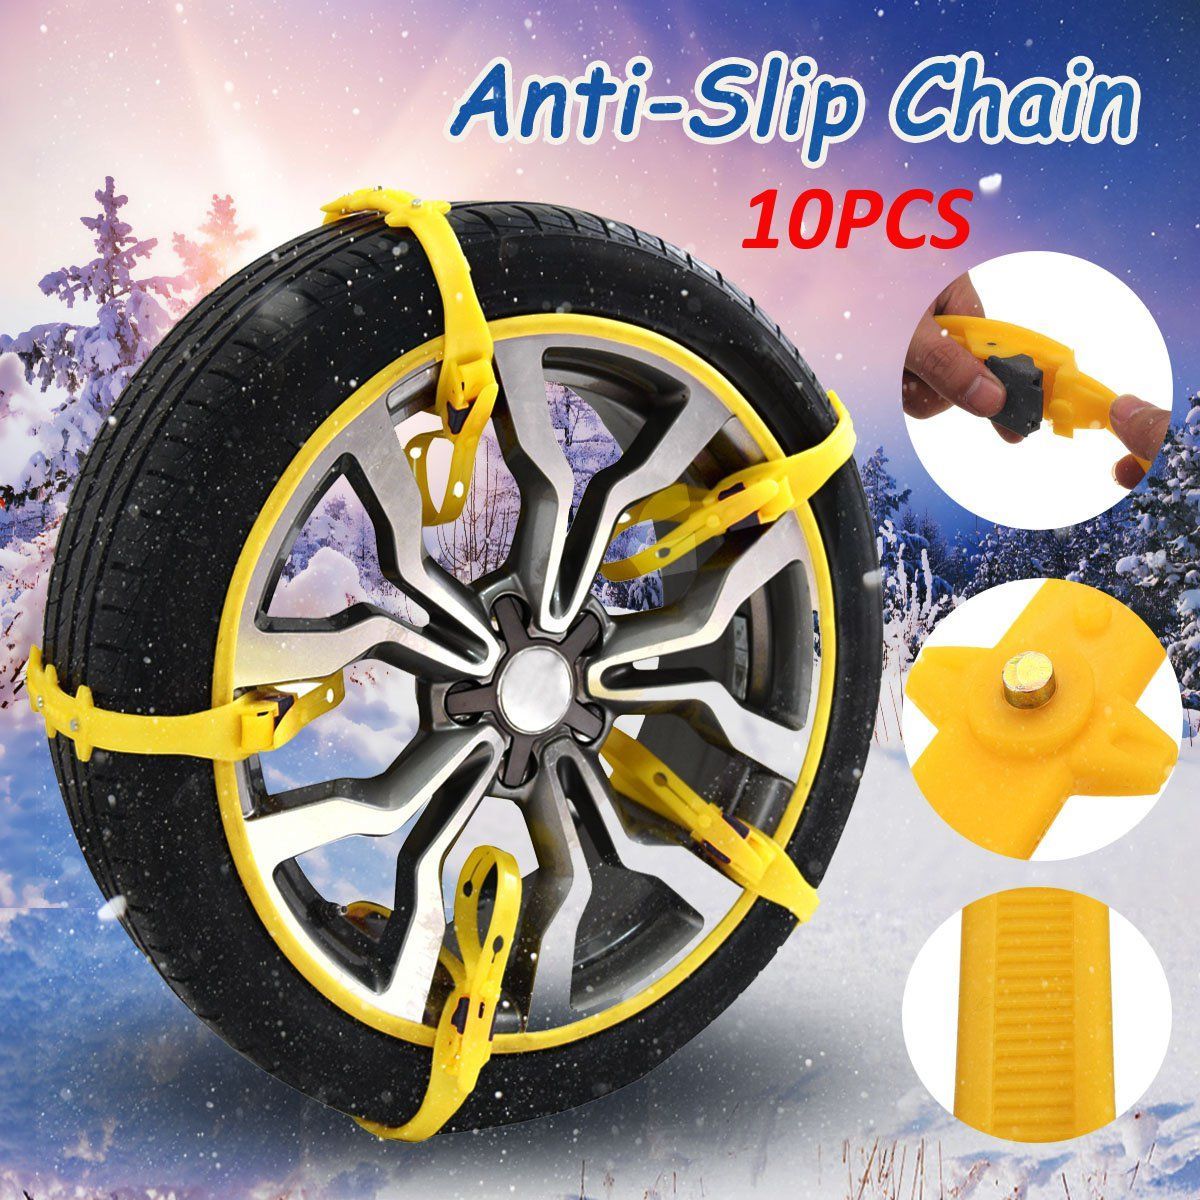 10PCS-TPU-Car-Snow-Chain-Winter-Emergency-Wheel-Tyre-Anti-skid-Chains-for-Off-Road-SUV-Truck-1602724